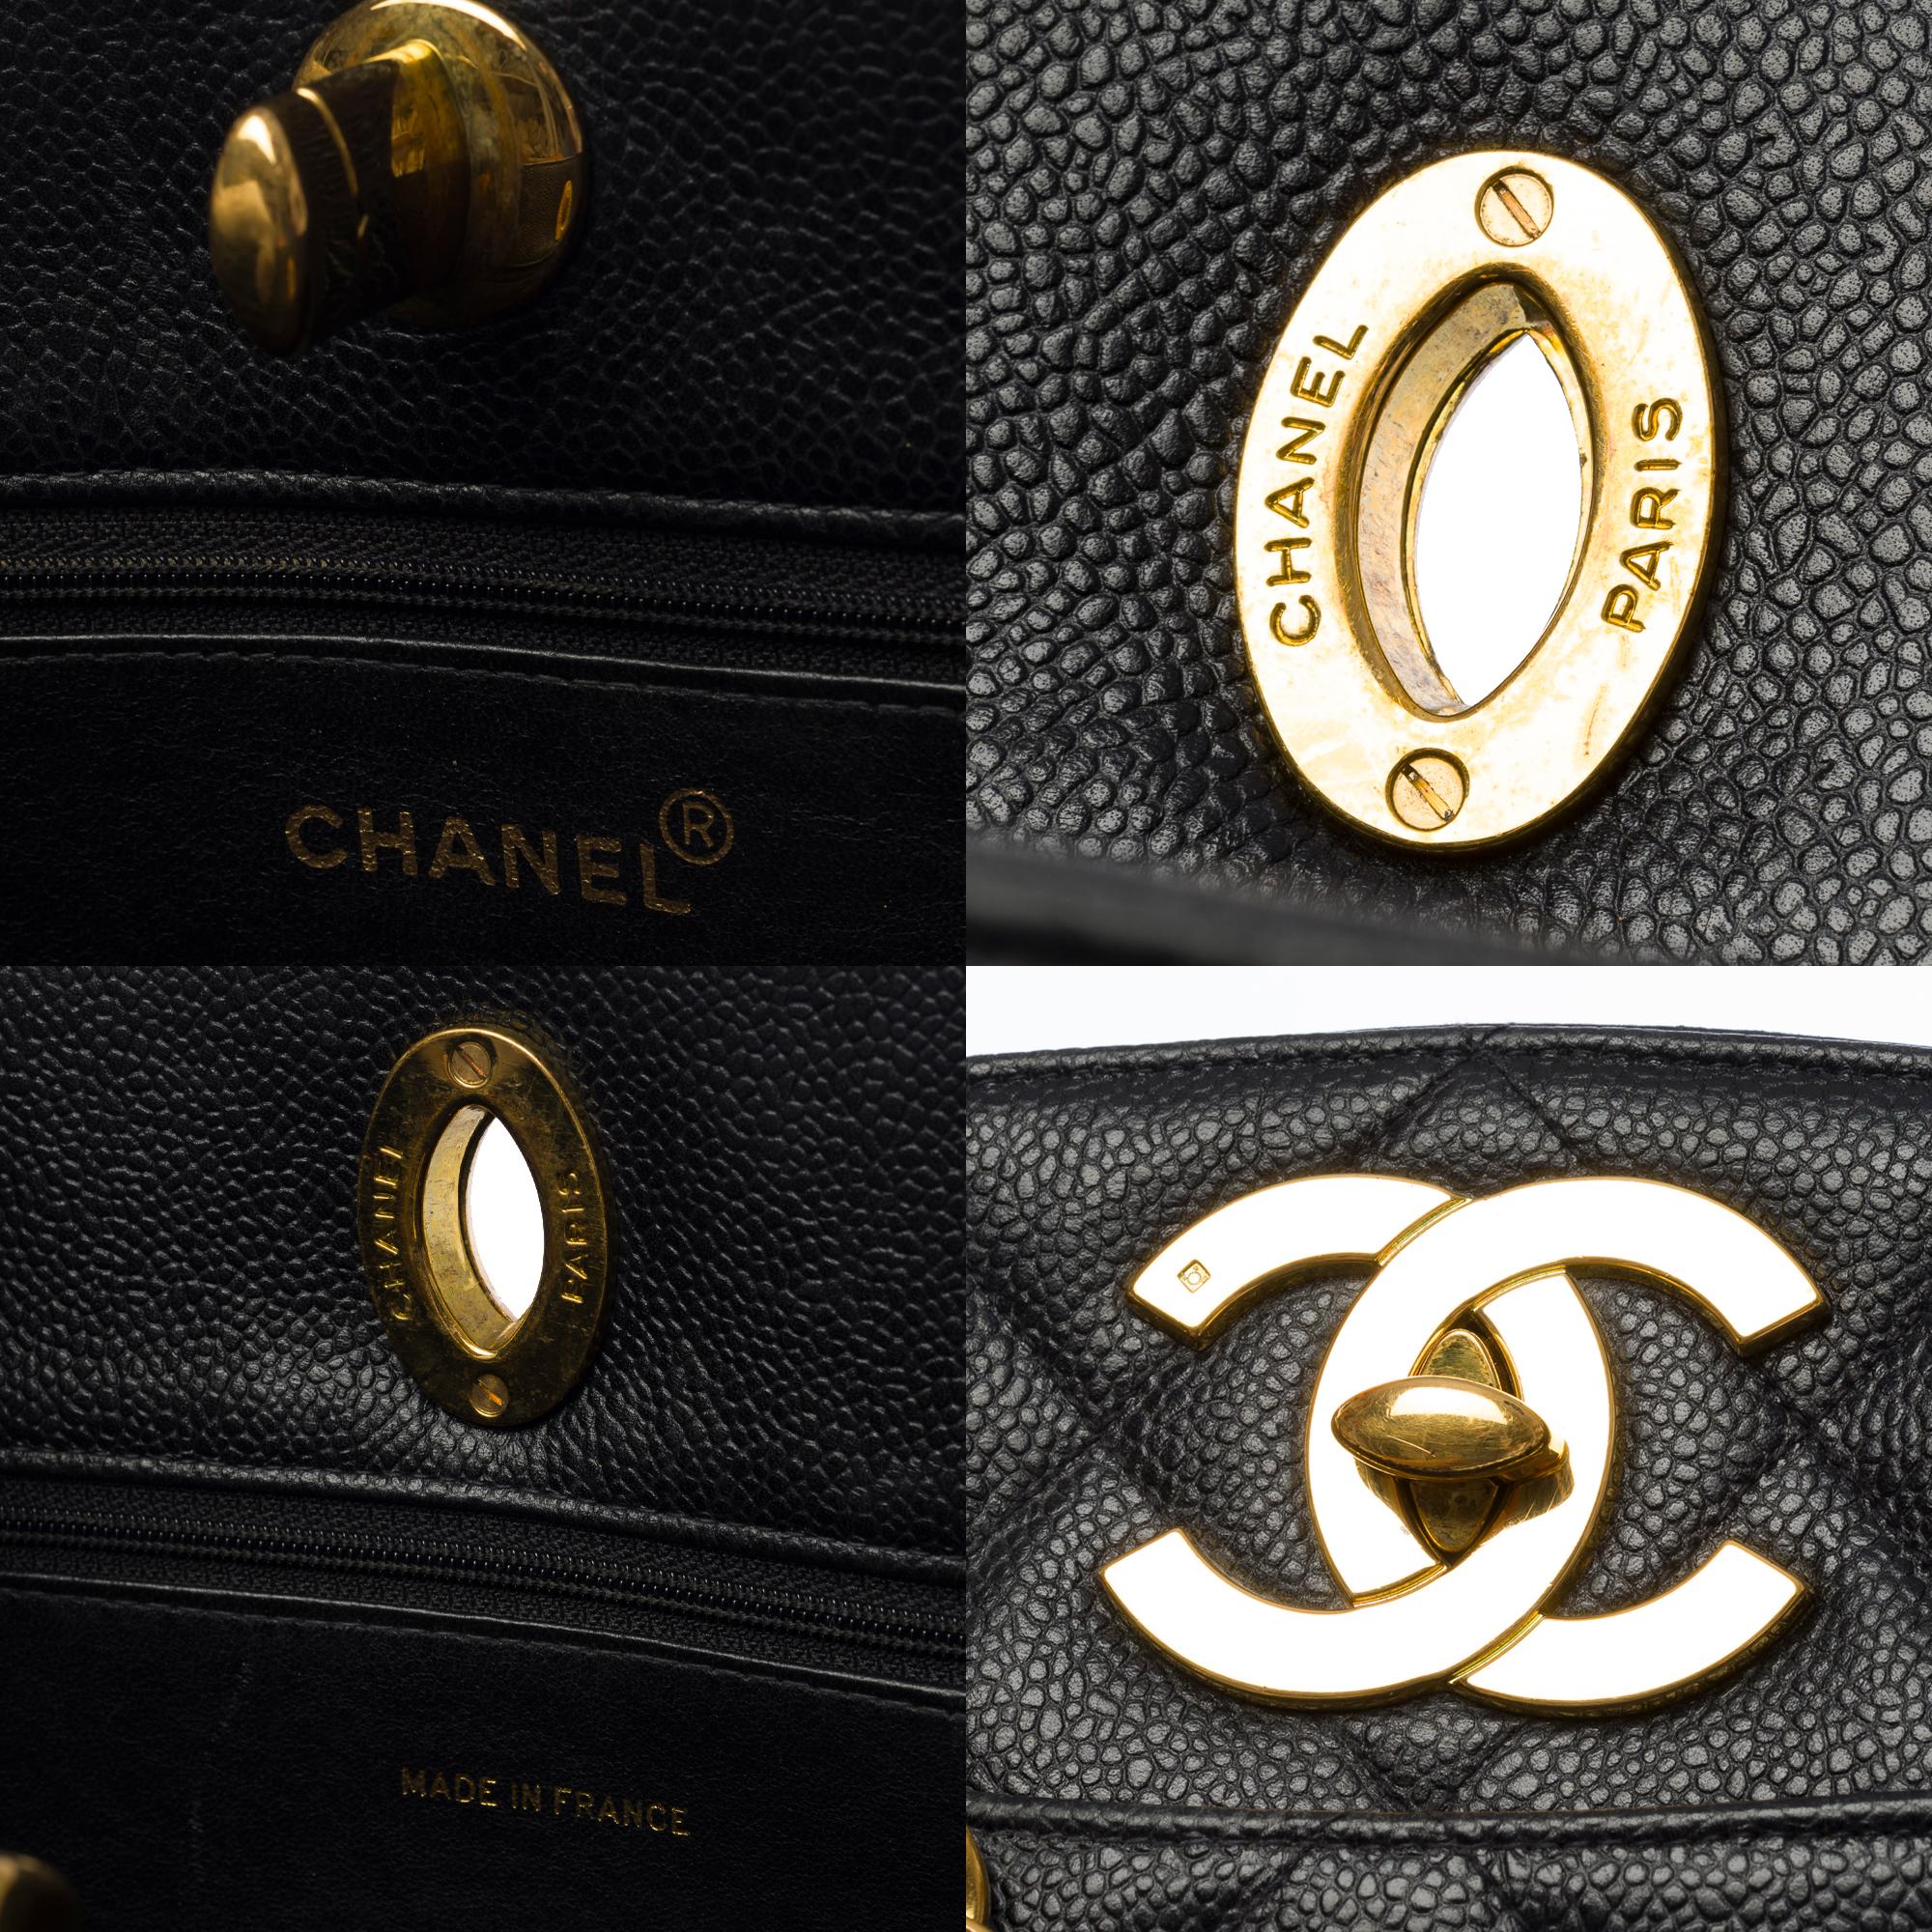 Amazing Chanel Shopping Tote bag in black Caviar quilted leather, GHW 2